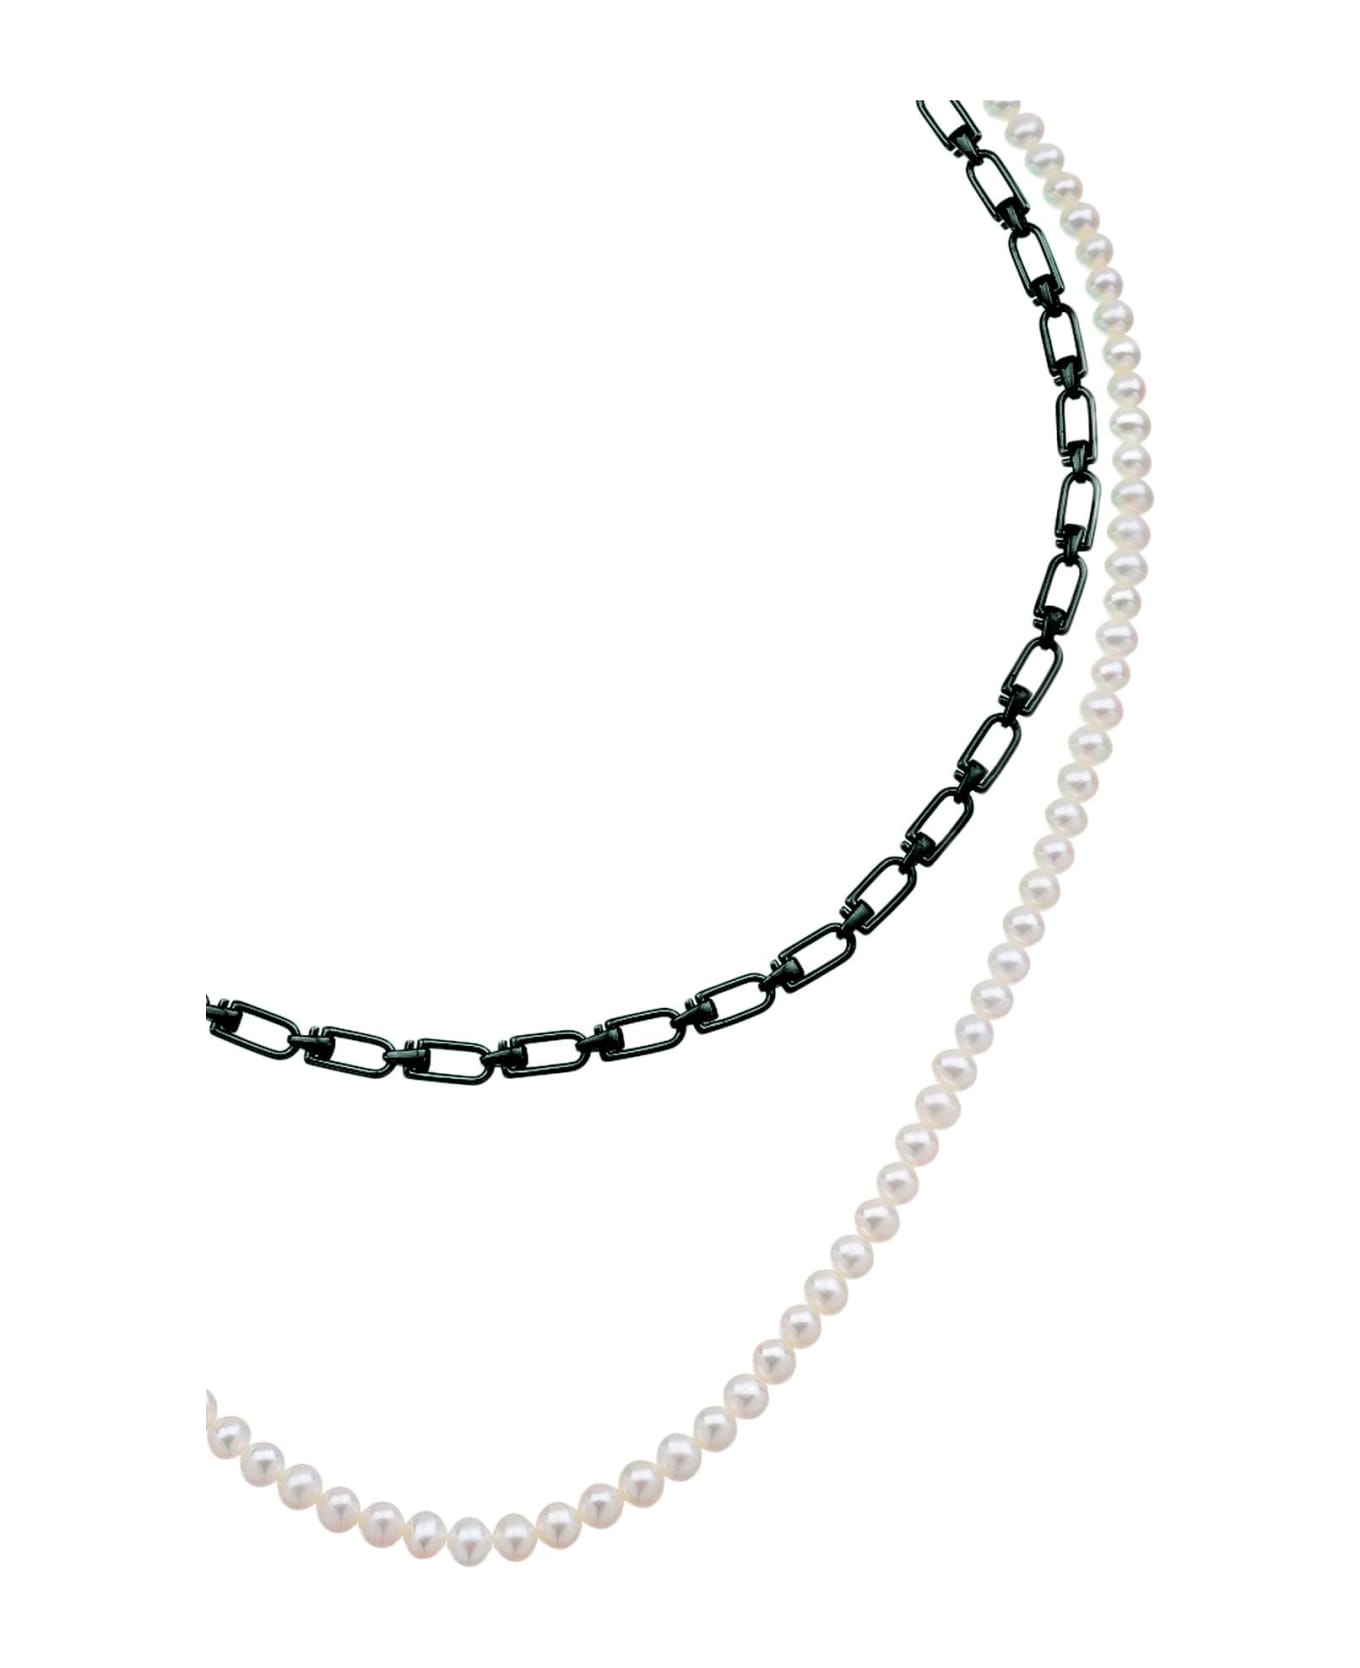 EÉRA 'reine' Double Necklace With Pearls - SILVER BLACK (White) ネックレス